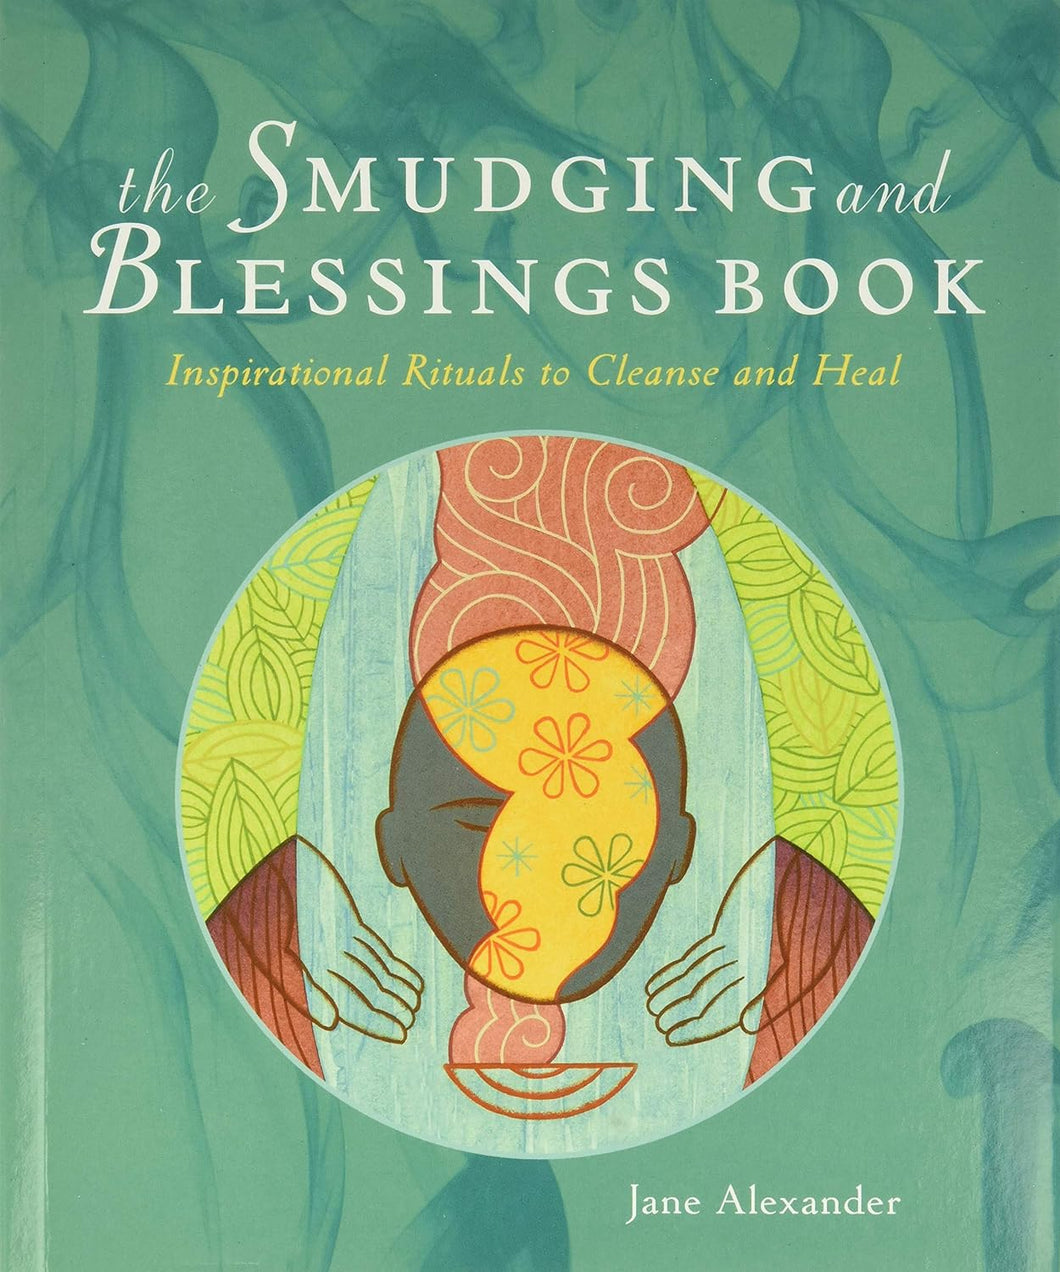 The Smudging and Blessings Book: Inspirational Rituals to Cleanse and Heal